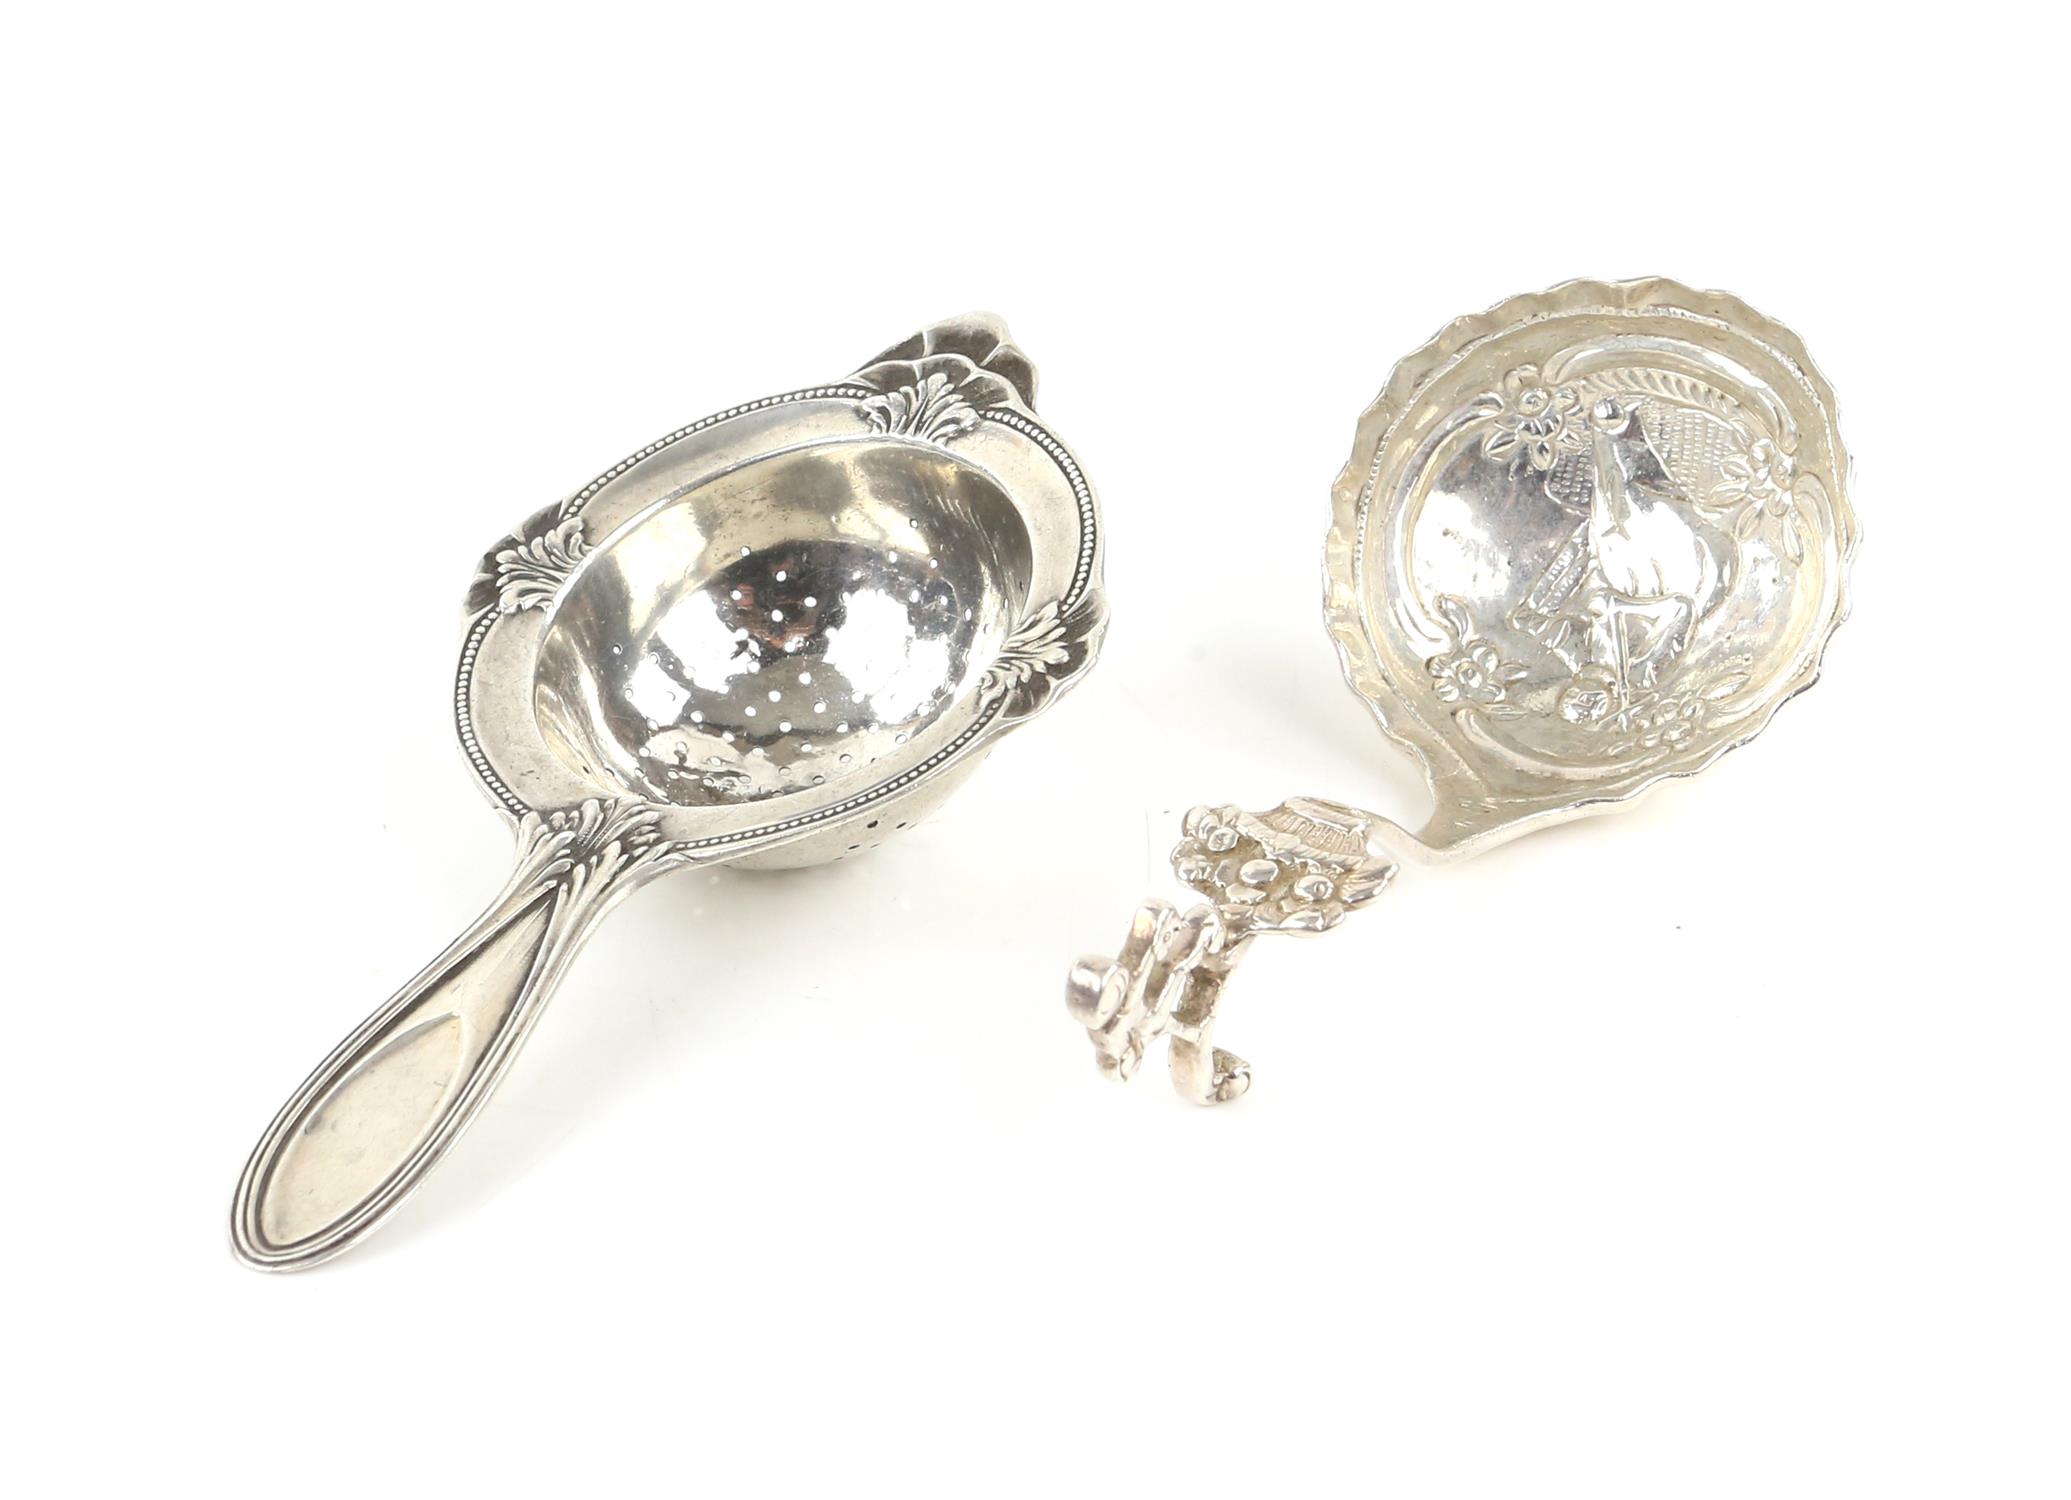 Continental silver caddy spoon and an 830 grade silver tea strainer